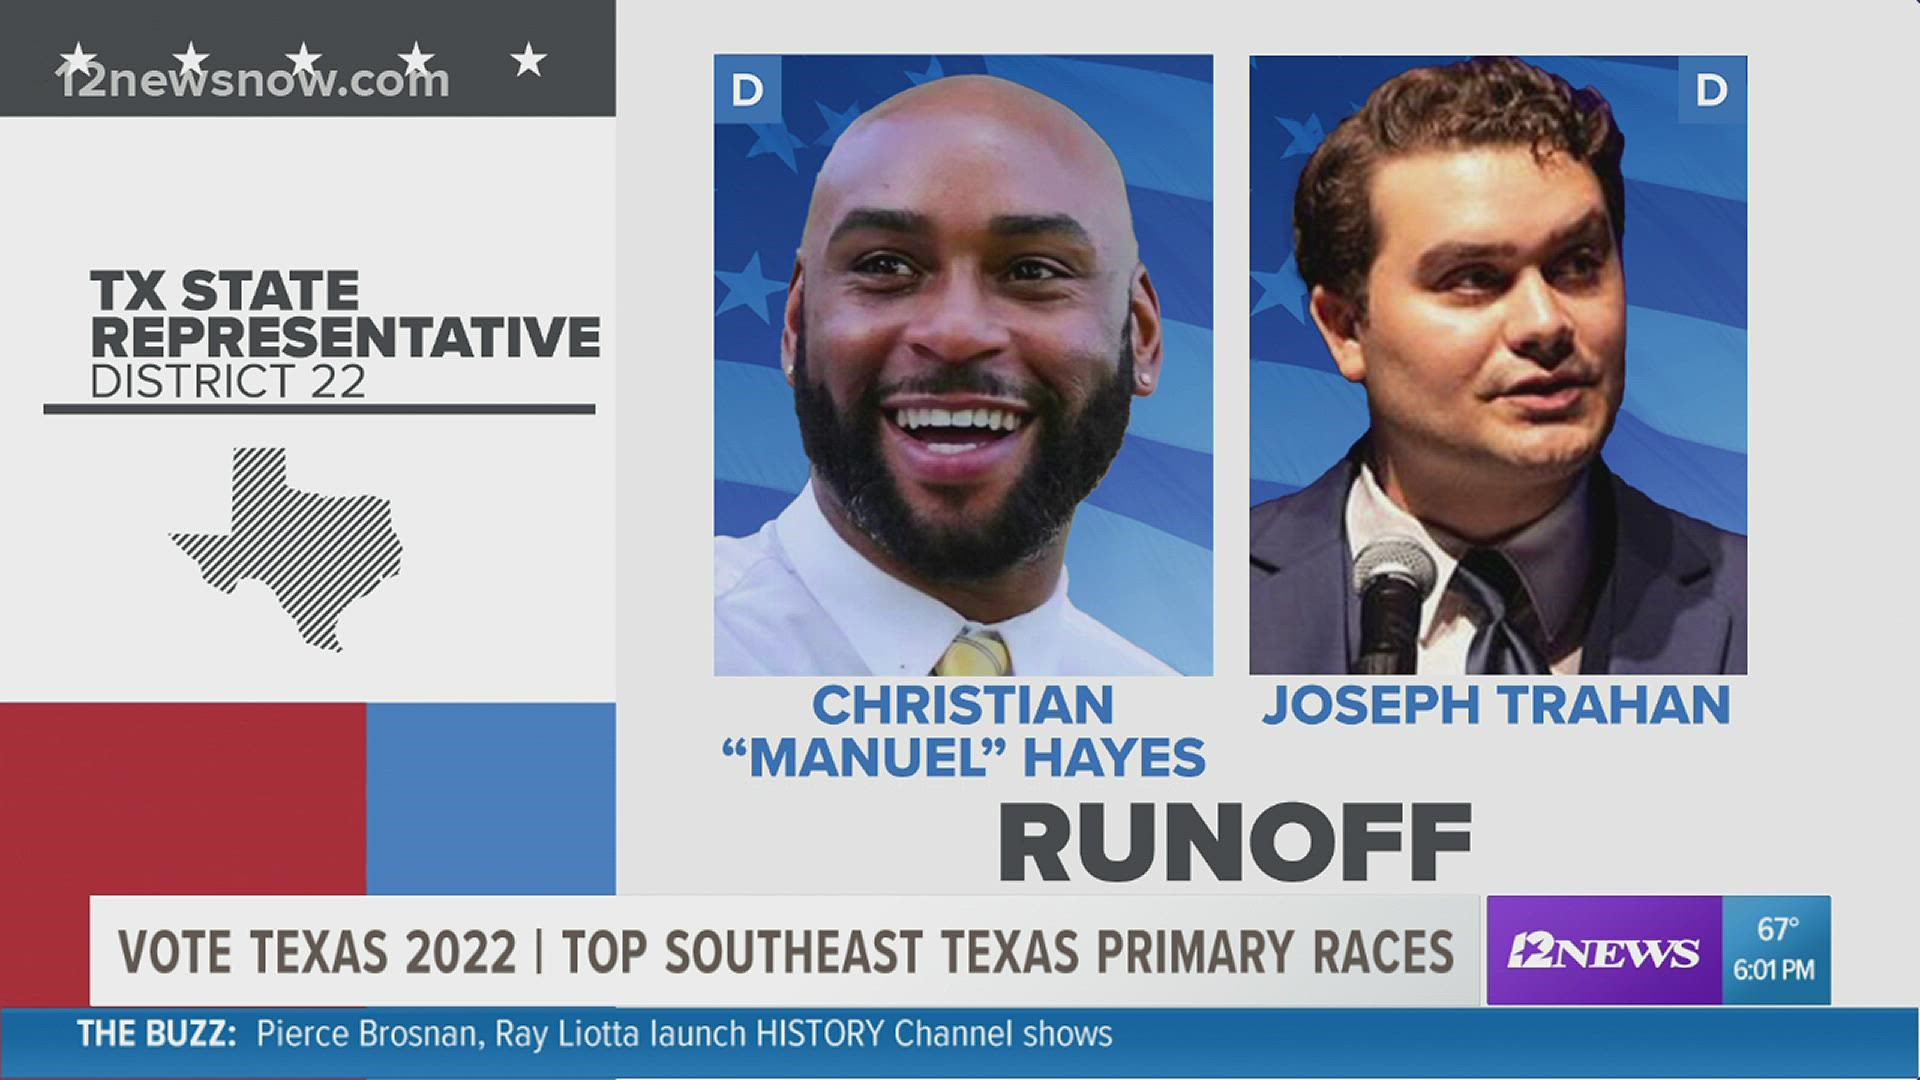 Runoff elections appear to be a common denominator among races across Southeast Texas and the state after Tuesday’s primary election.